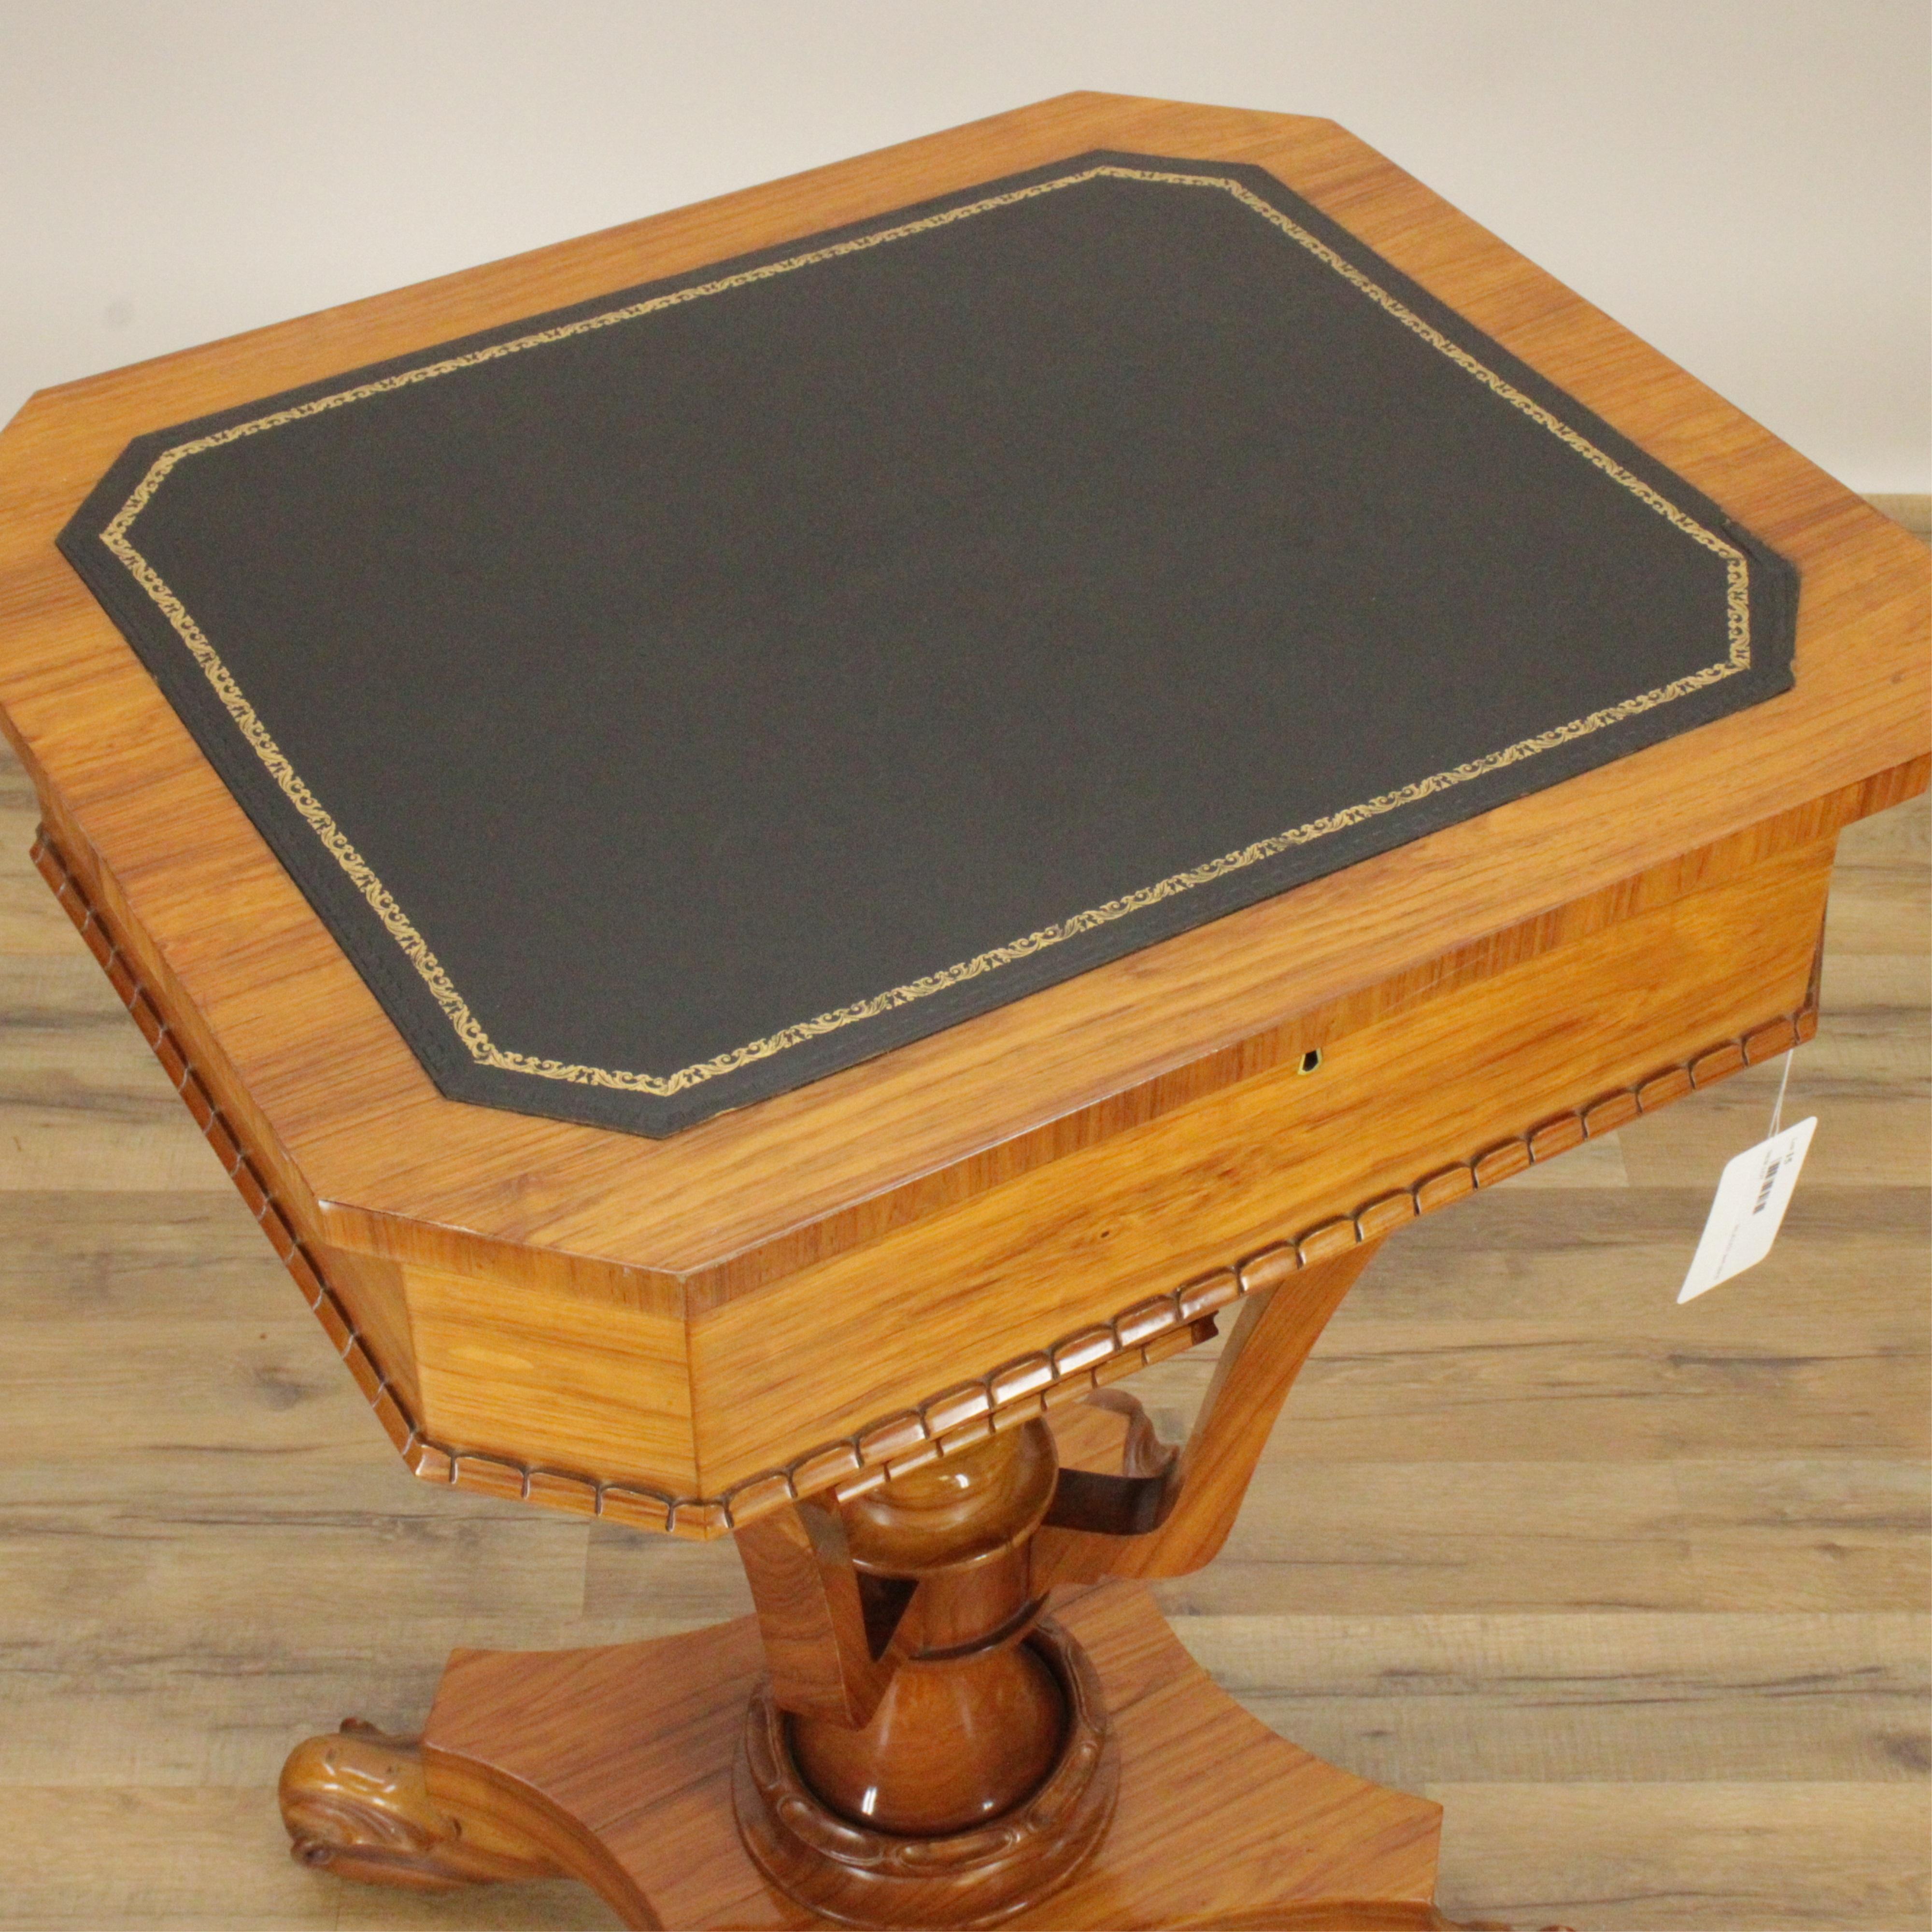 Late Regency Tulipwood and leather lift-top writing table, 19th century 
Fitted interior with reading stand
Provenance: Property from the Private Collection of Steven Stark
Measures: 30